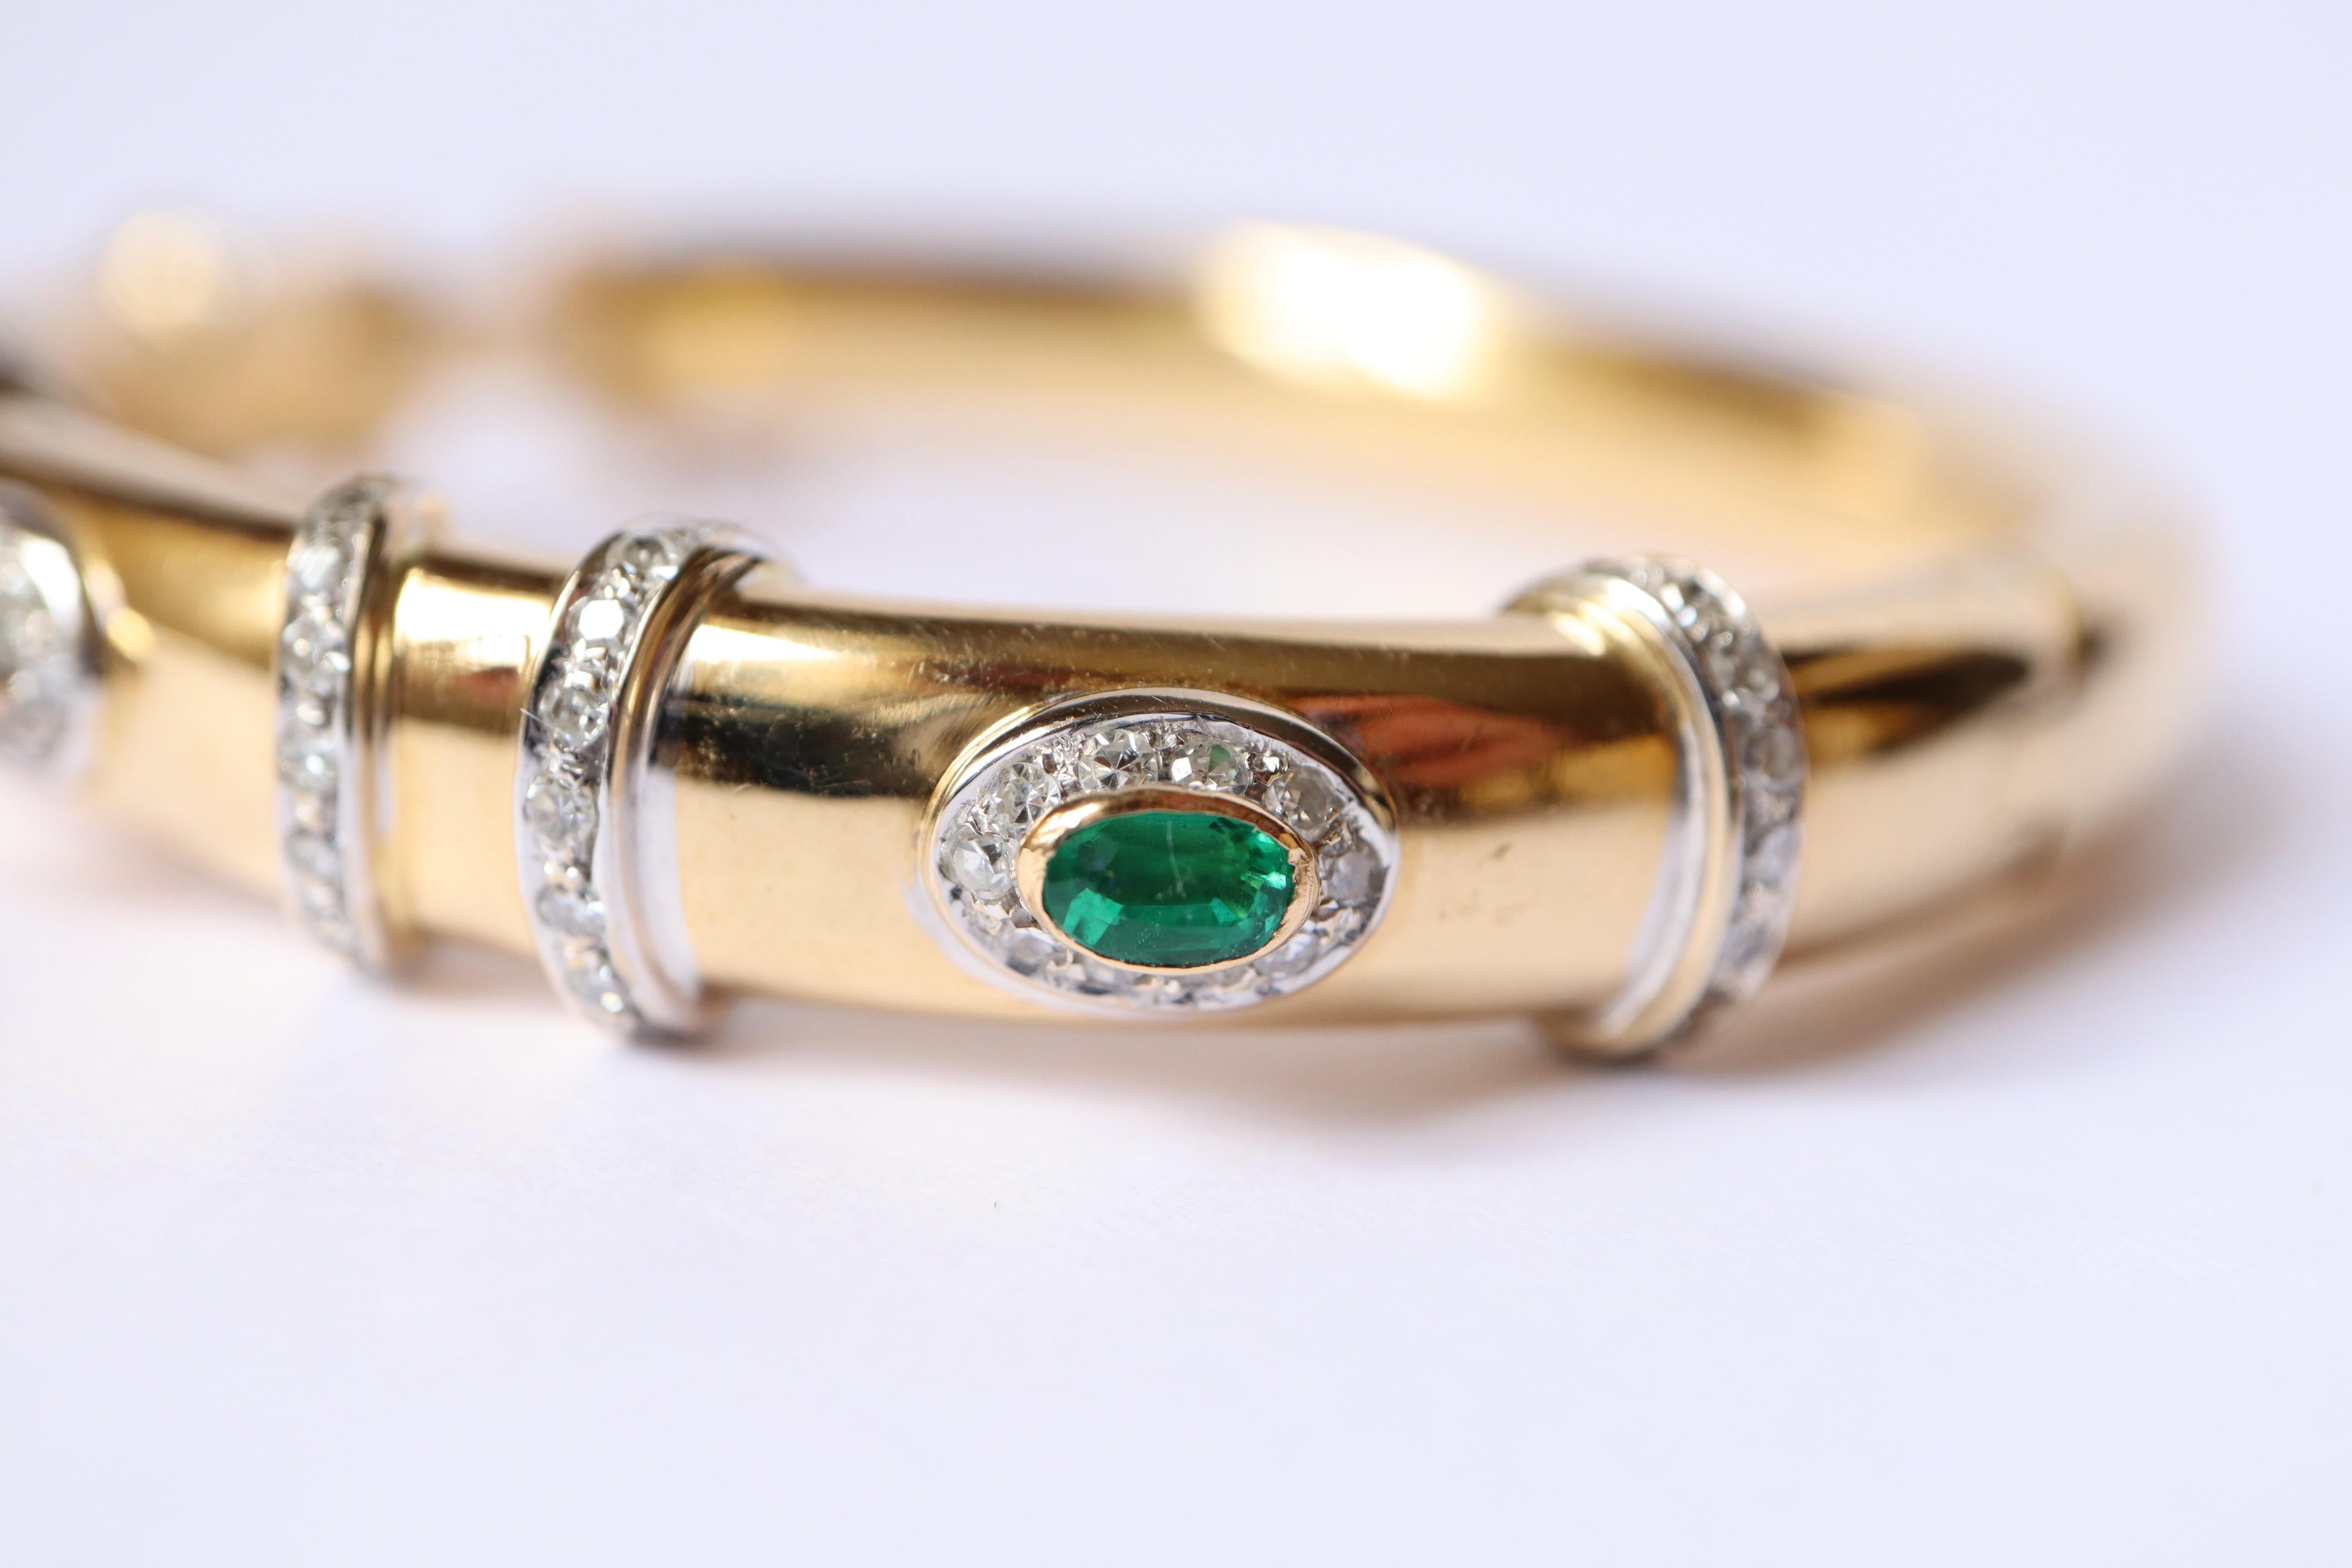 Cartier Rigid Emerald Bracelet 1960 in Yellow and White Gold 18 kt and Diamonds 10